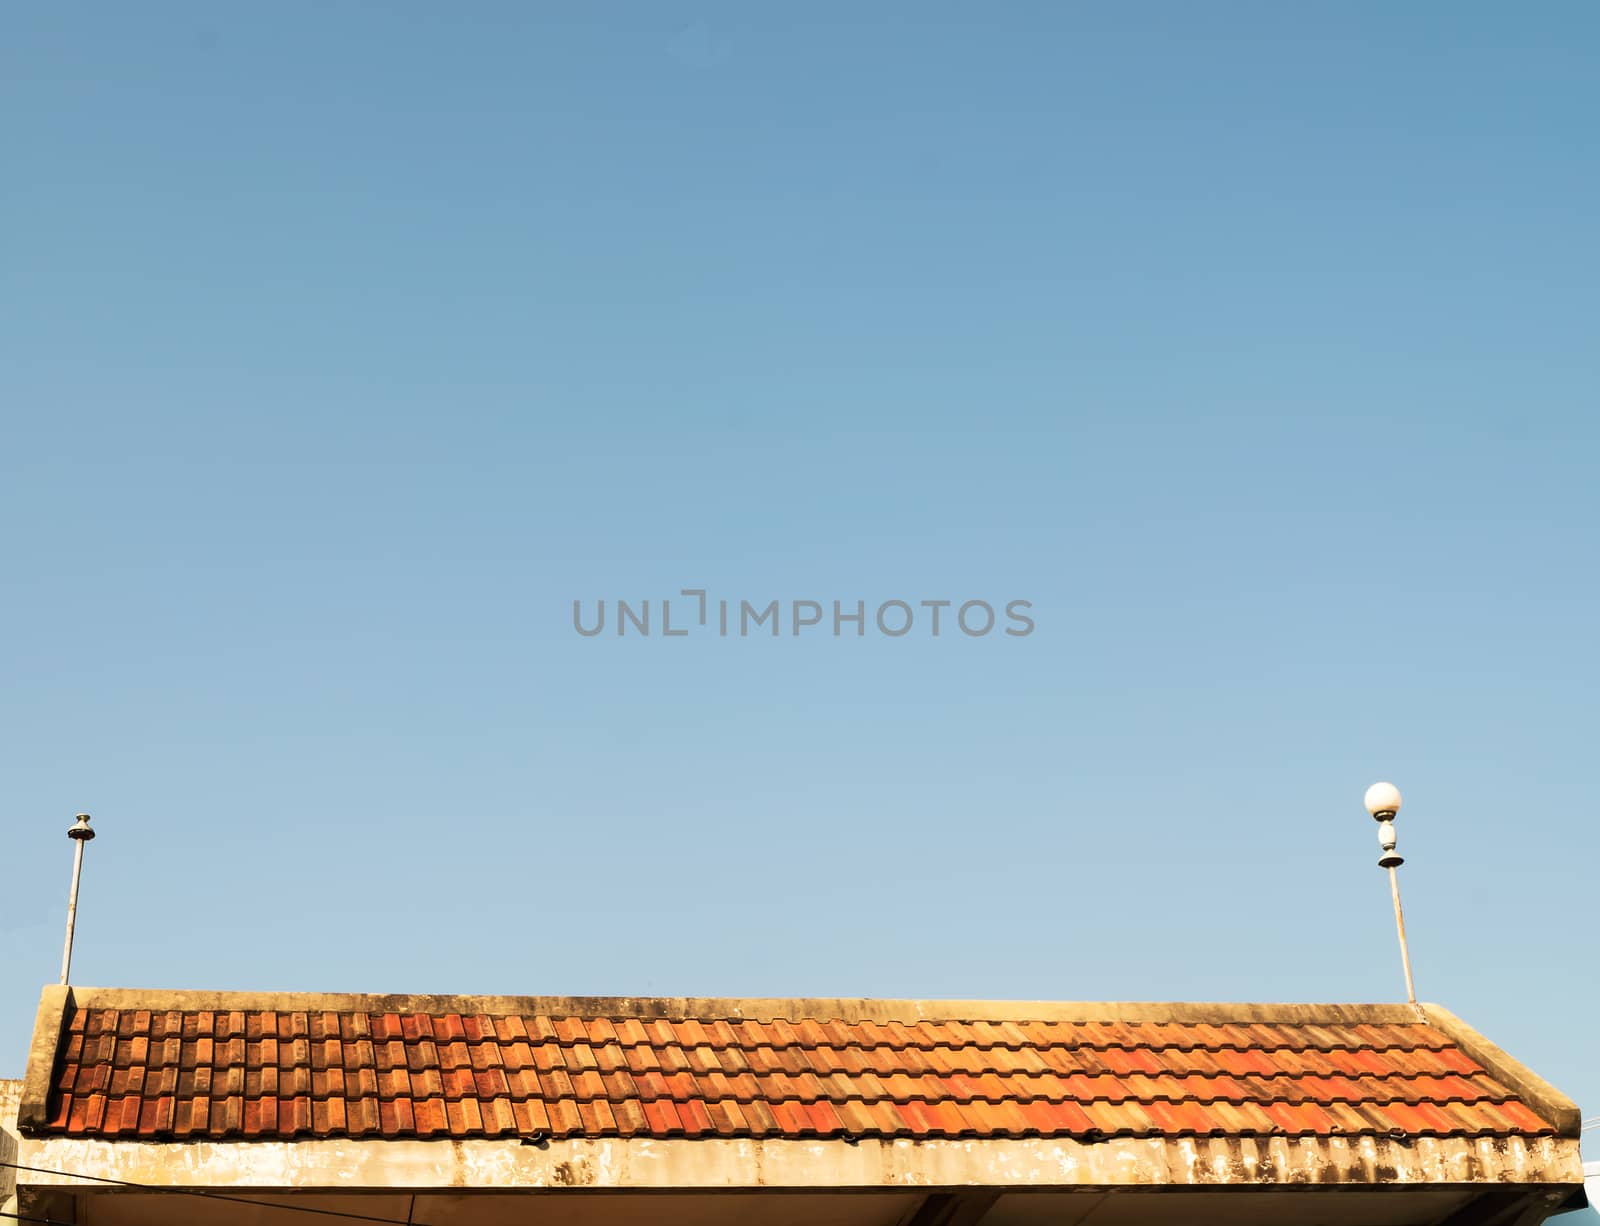 Old roof house with orange tile roof on blue sky